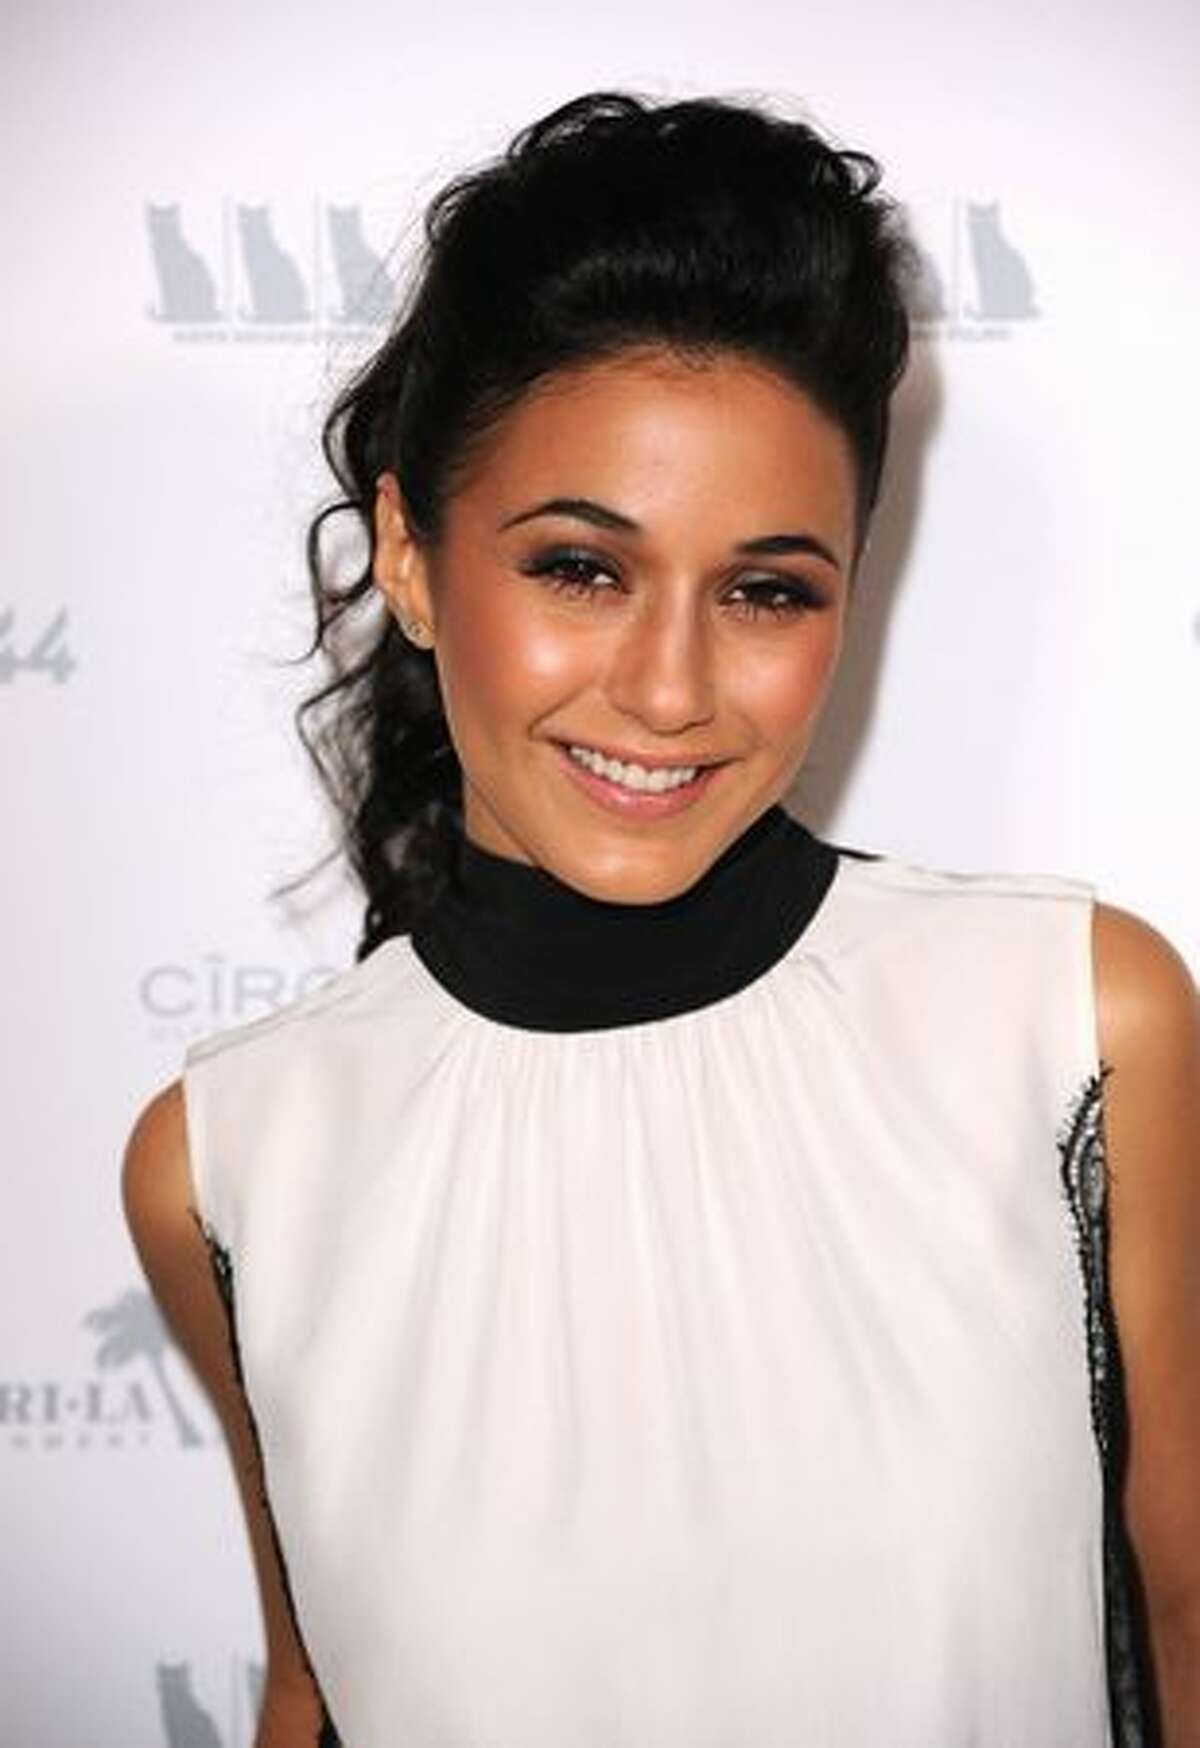 Actress Emmanuelle Chriqui arrives premiere Of Shangri-La Entertainment's "Girl Walks Into A Bar" held at the ArcLight Cinemas in Los Angeles, California.